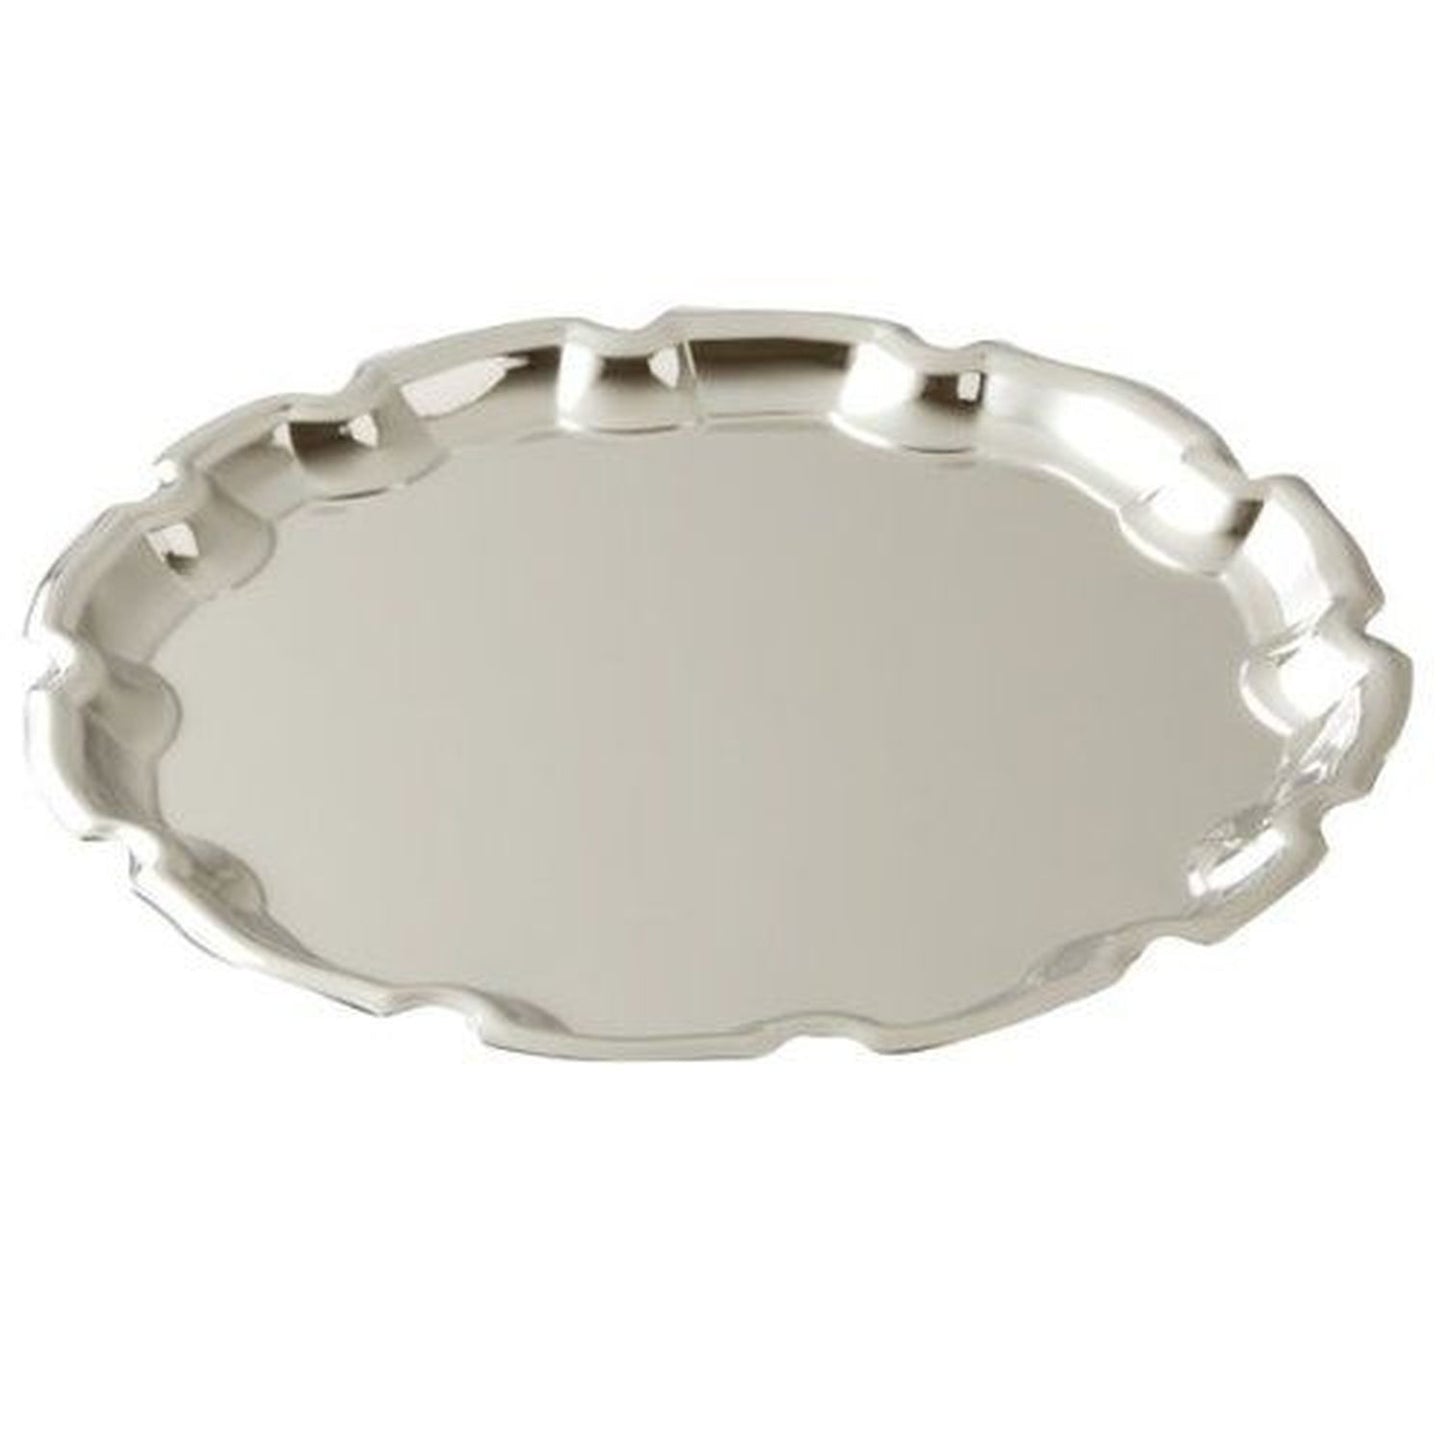 Leeber Round Chippendale Tray, 10", Nickel Plated